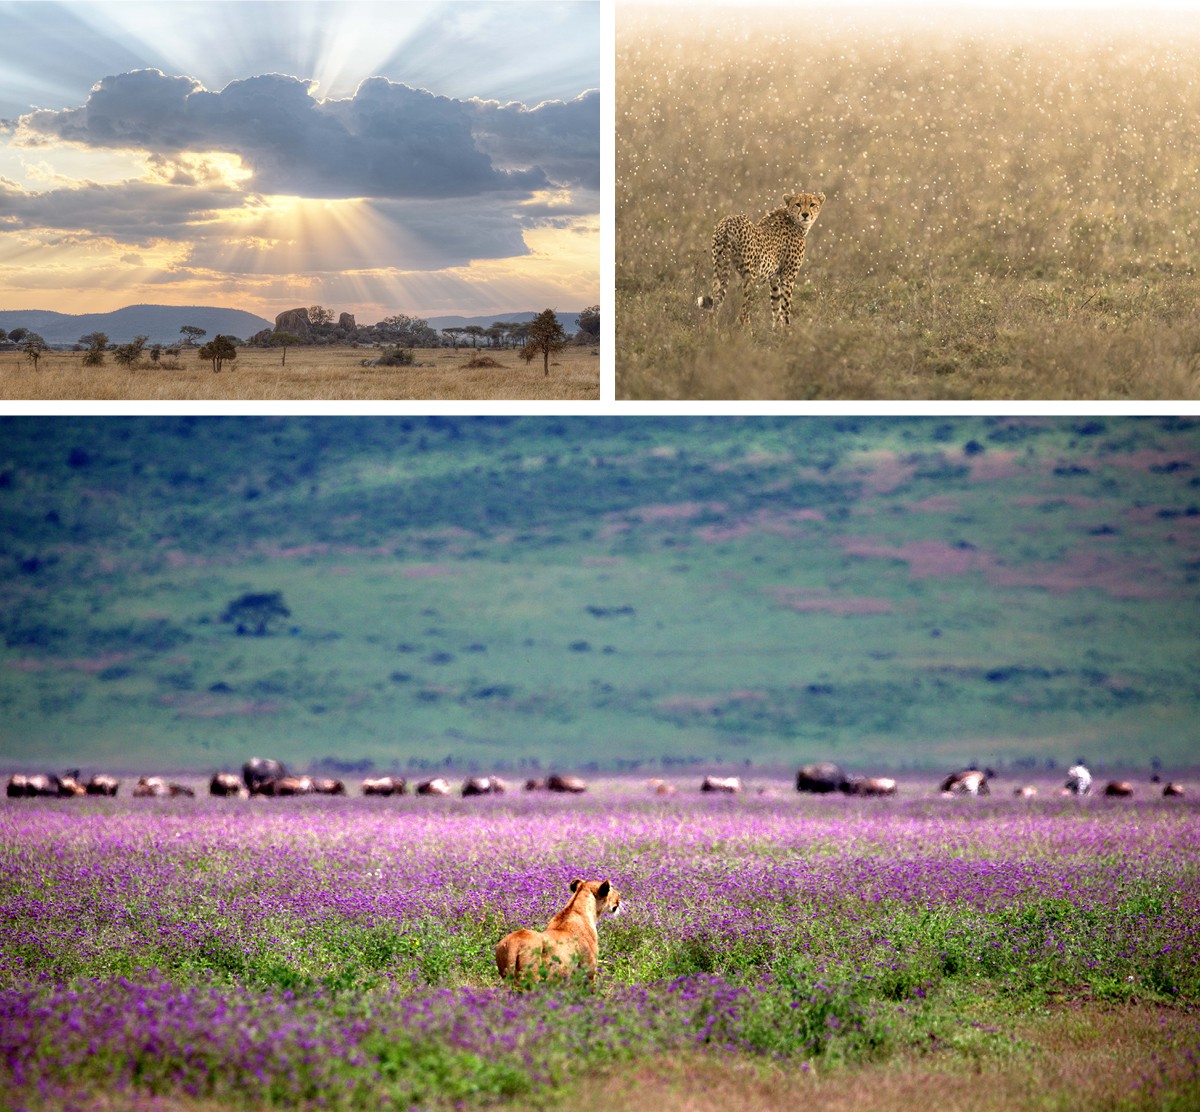 The green season in East Africa presents remarkable photography opportunities.